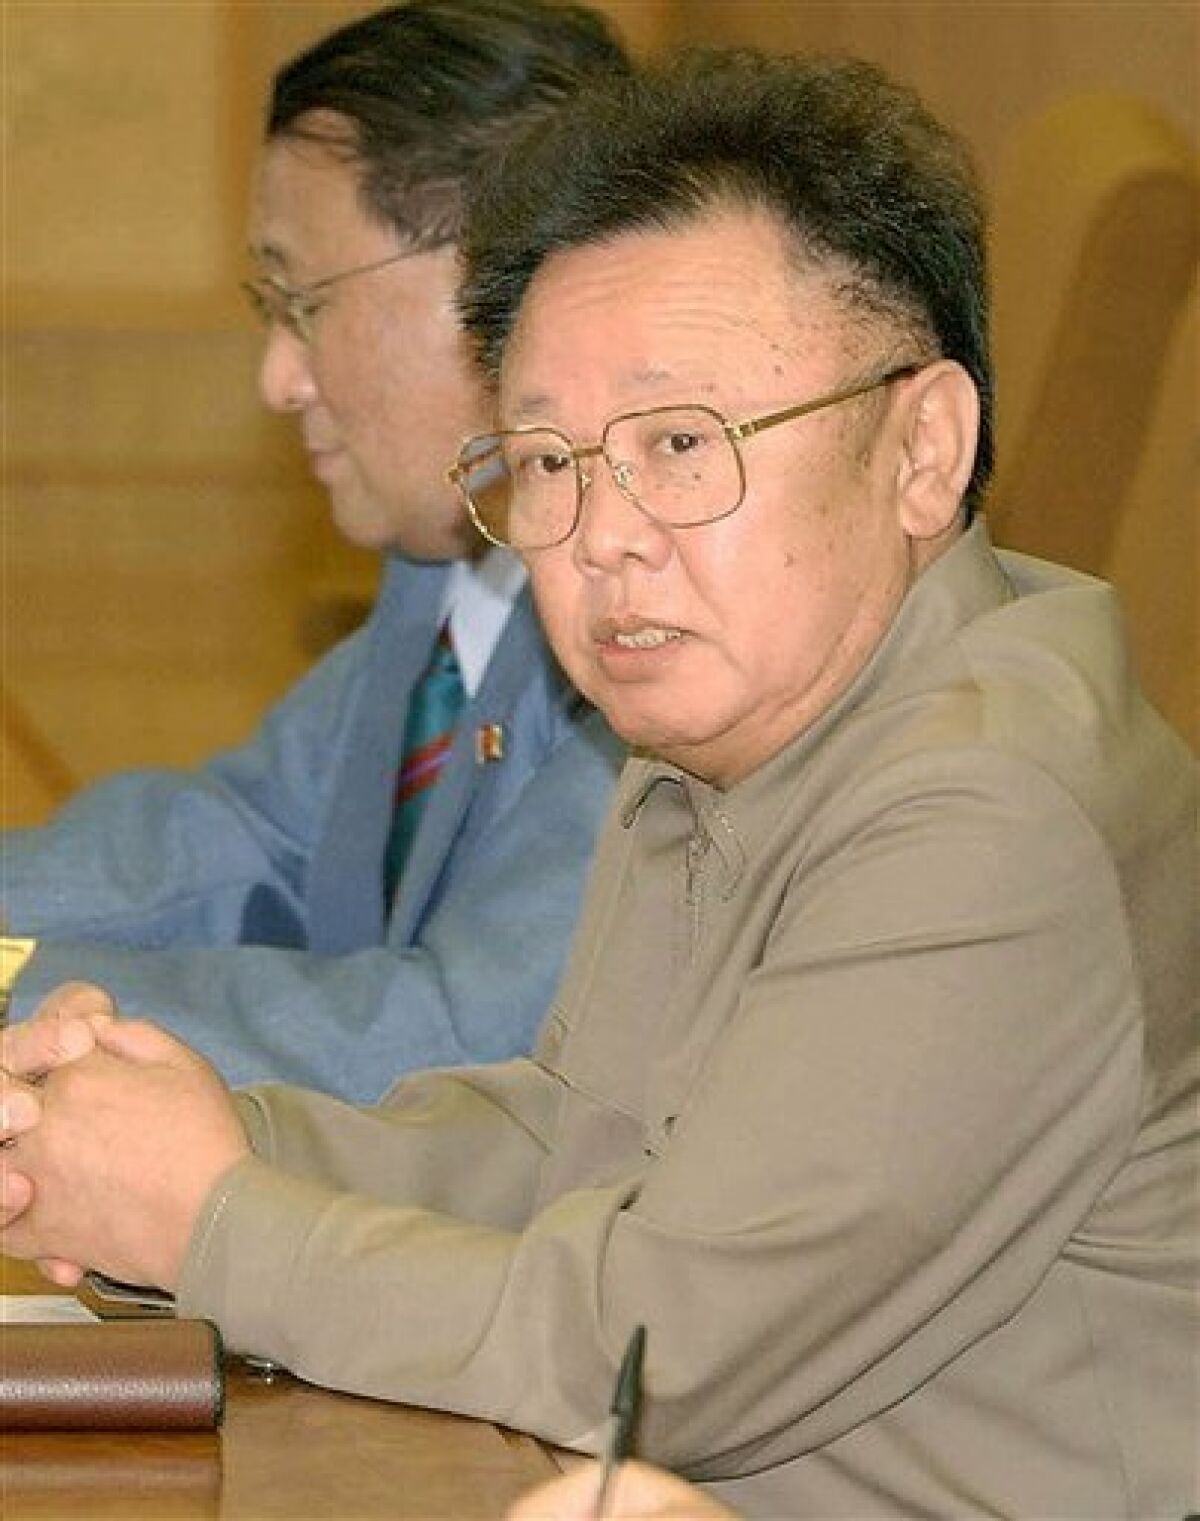 FILE- This file photo taken on Saturday, May 22, 2004, shows North Korean leader Kim Jong Il, foreground, accompanied by North Korean Vice Foreign Minister Kang Sok Ju, background, during a summit with Japanese Prime Minister Junichiro Koizumi in Pyongyang. North Korea told its diplomatic missions that Kim Jong Il's youngest son - who reportedly enjoys skiing and studied English, German and French at a Swiss school - will be the nation's next leader, a South Korean lawmaker and newspapers said Tuesday, June 2, 2009. The secretive communist state sent the message about the 26-year-old son, Jong Un, after the nation's May 25 nuclear test, which along with a series of missile tests has greatly raised tensions in the region, the Hankook Ilbo reported. (AP Photo/Japan Pool, File)